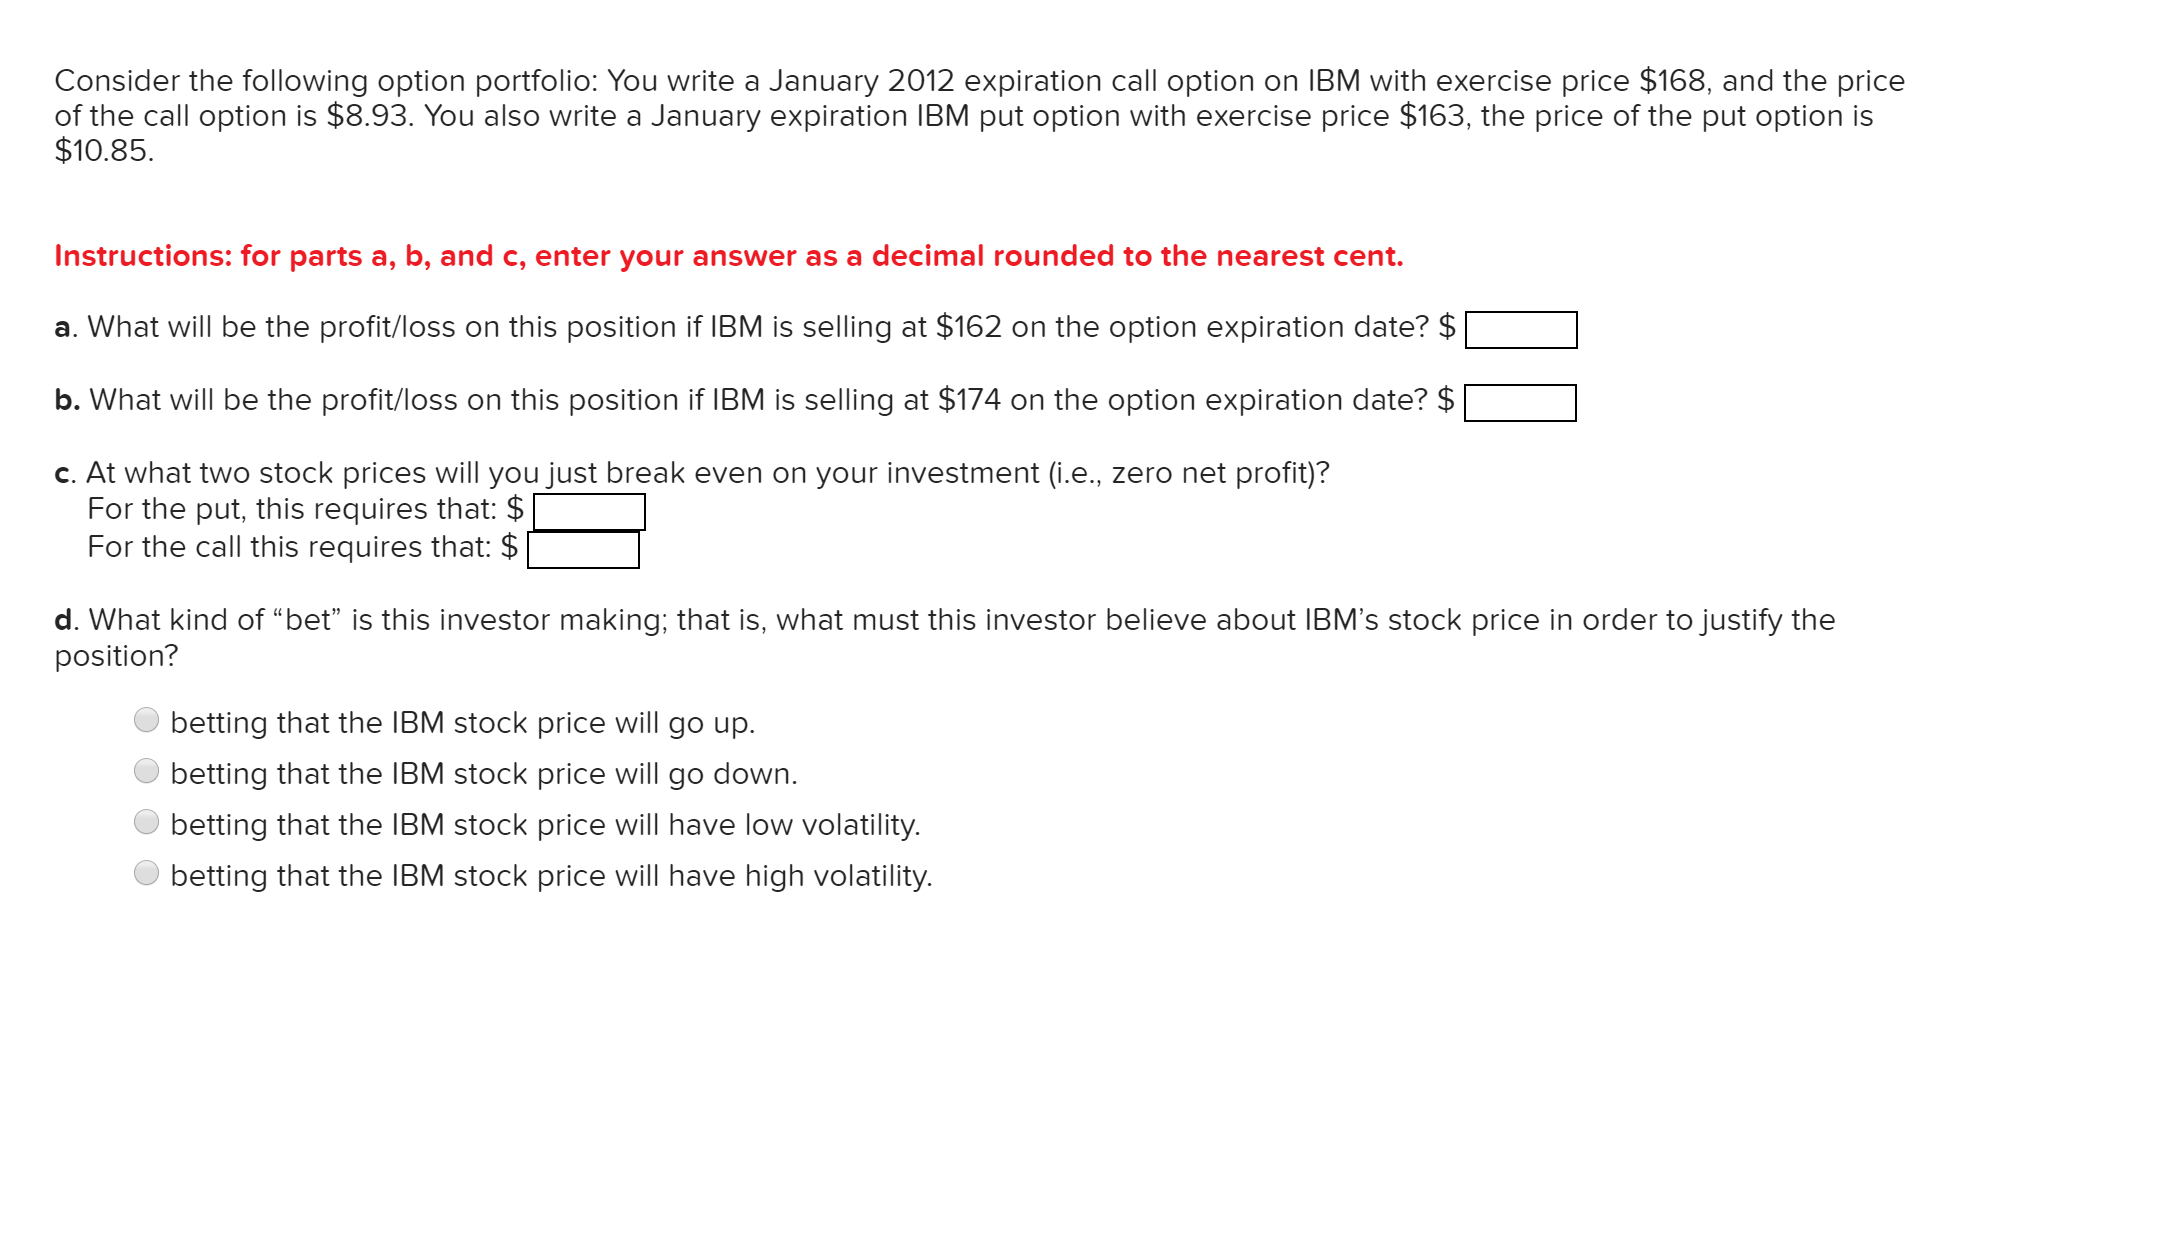 Consider the following option portfolio: You write a January 2012 expiration call option on IBM with exercise price $168, and the price
of the call option is $8.93. You also write a January expiration IBM put option with exercise price $163, the price of the put option is
$10.85.
Instructions: for parts a, b, and c, enter your answer as a decimal rounded to the nearest cent.
a. What will be the profit/loss on this position if IBM is selling at $162 on the option expiration date? $
b. What will be the profit/loss on this position if IBM is selling at $174 on the option expiration date? $
c. At what two stock prices will you just break even on your investment (i.e., zero net profit)?
For the put, this requires that: $
For the call this requires that: $
d. What kind of “bet" is this investor making; that is, what must this investor believe about IBM's stock price in order to justify the
position?
betting that the IBM stock price will go up.
betting that the IBM stock price will go down.
betting that the IBM stock price will have low volatility.
betting that the IBM stock price will have high volatility.
